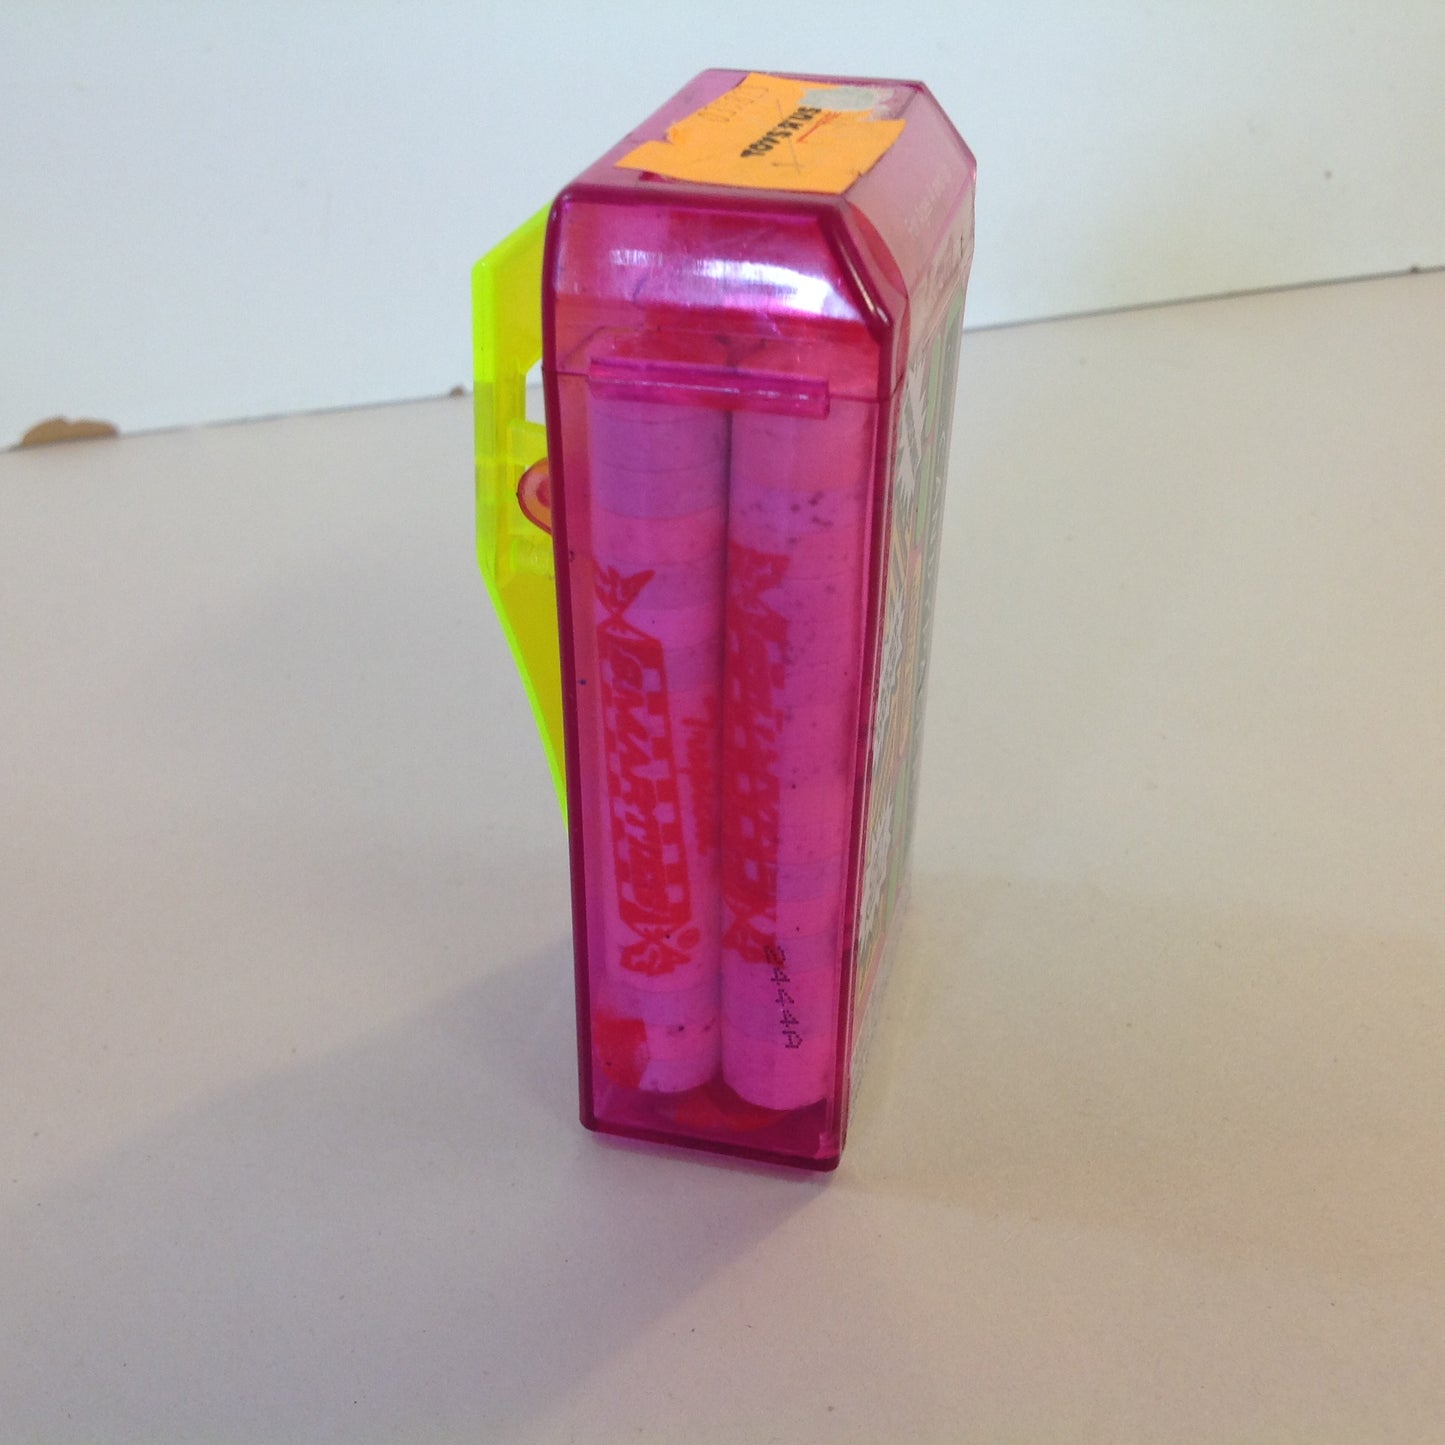 Vintage 1994 Unopened NOS Berzerk Candy Werks CandyPager Candy Container